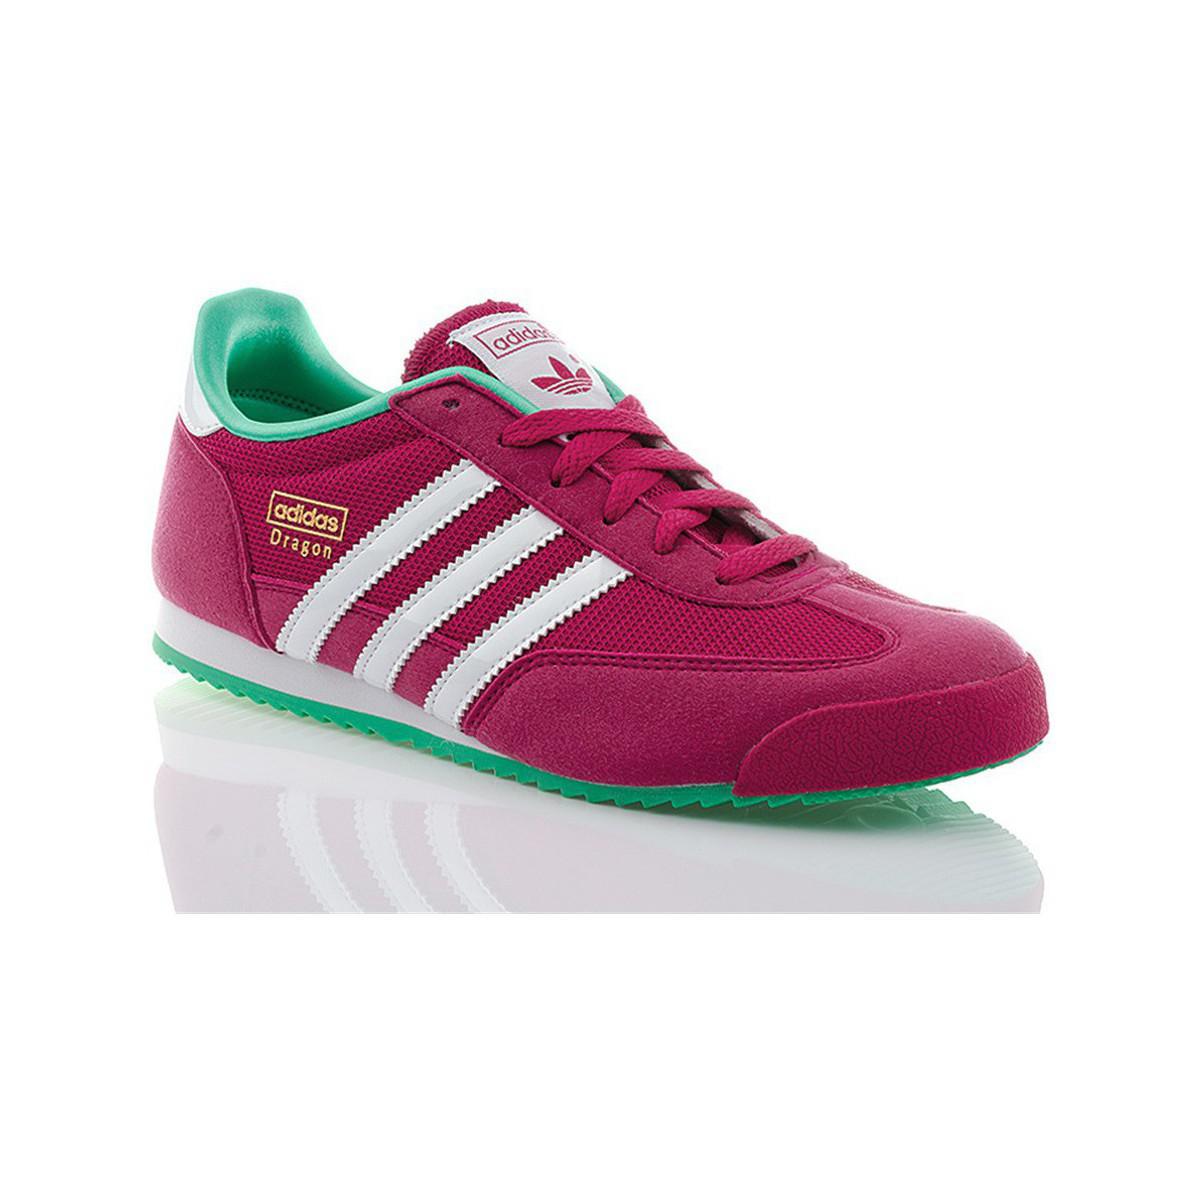 green adidas dragon trainersLimited Special Sales and Special Offers –  Women's & Men's Sneakers & Sports Shoes - Shop Athletic Shoes Online >  OFF-53% Free Shipping & Fast Shippment!